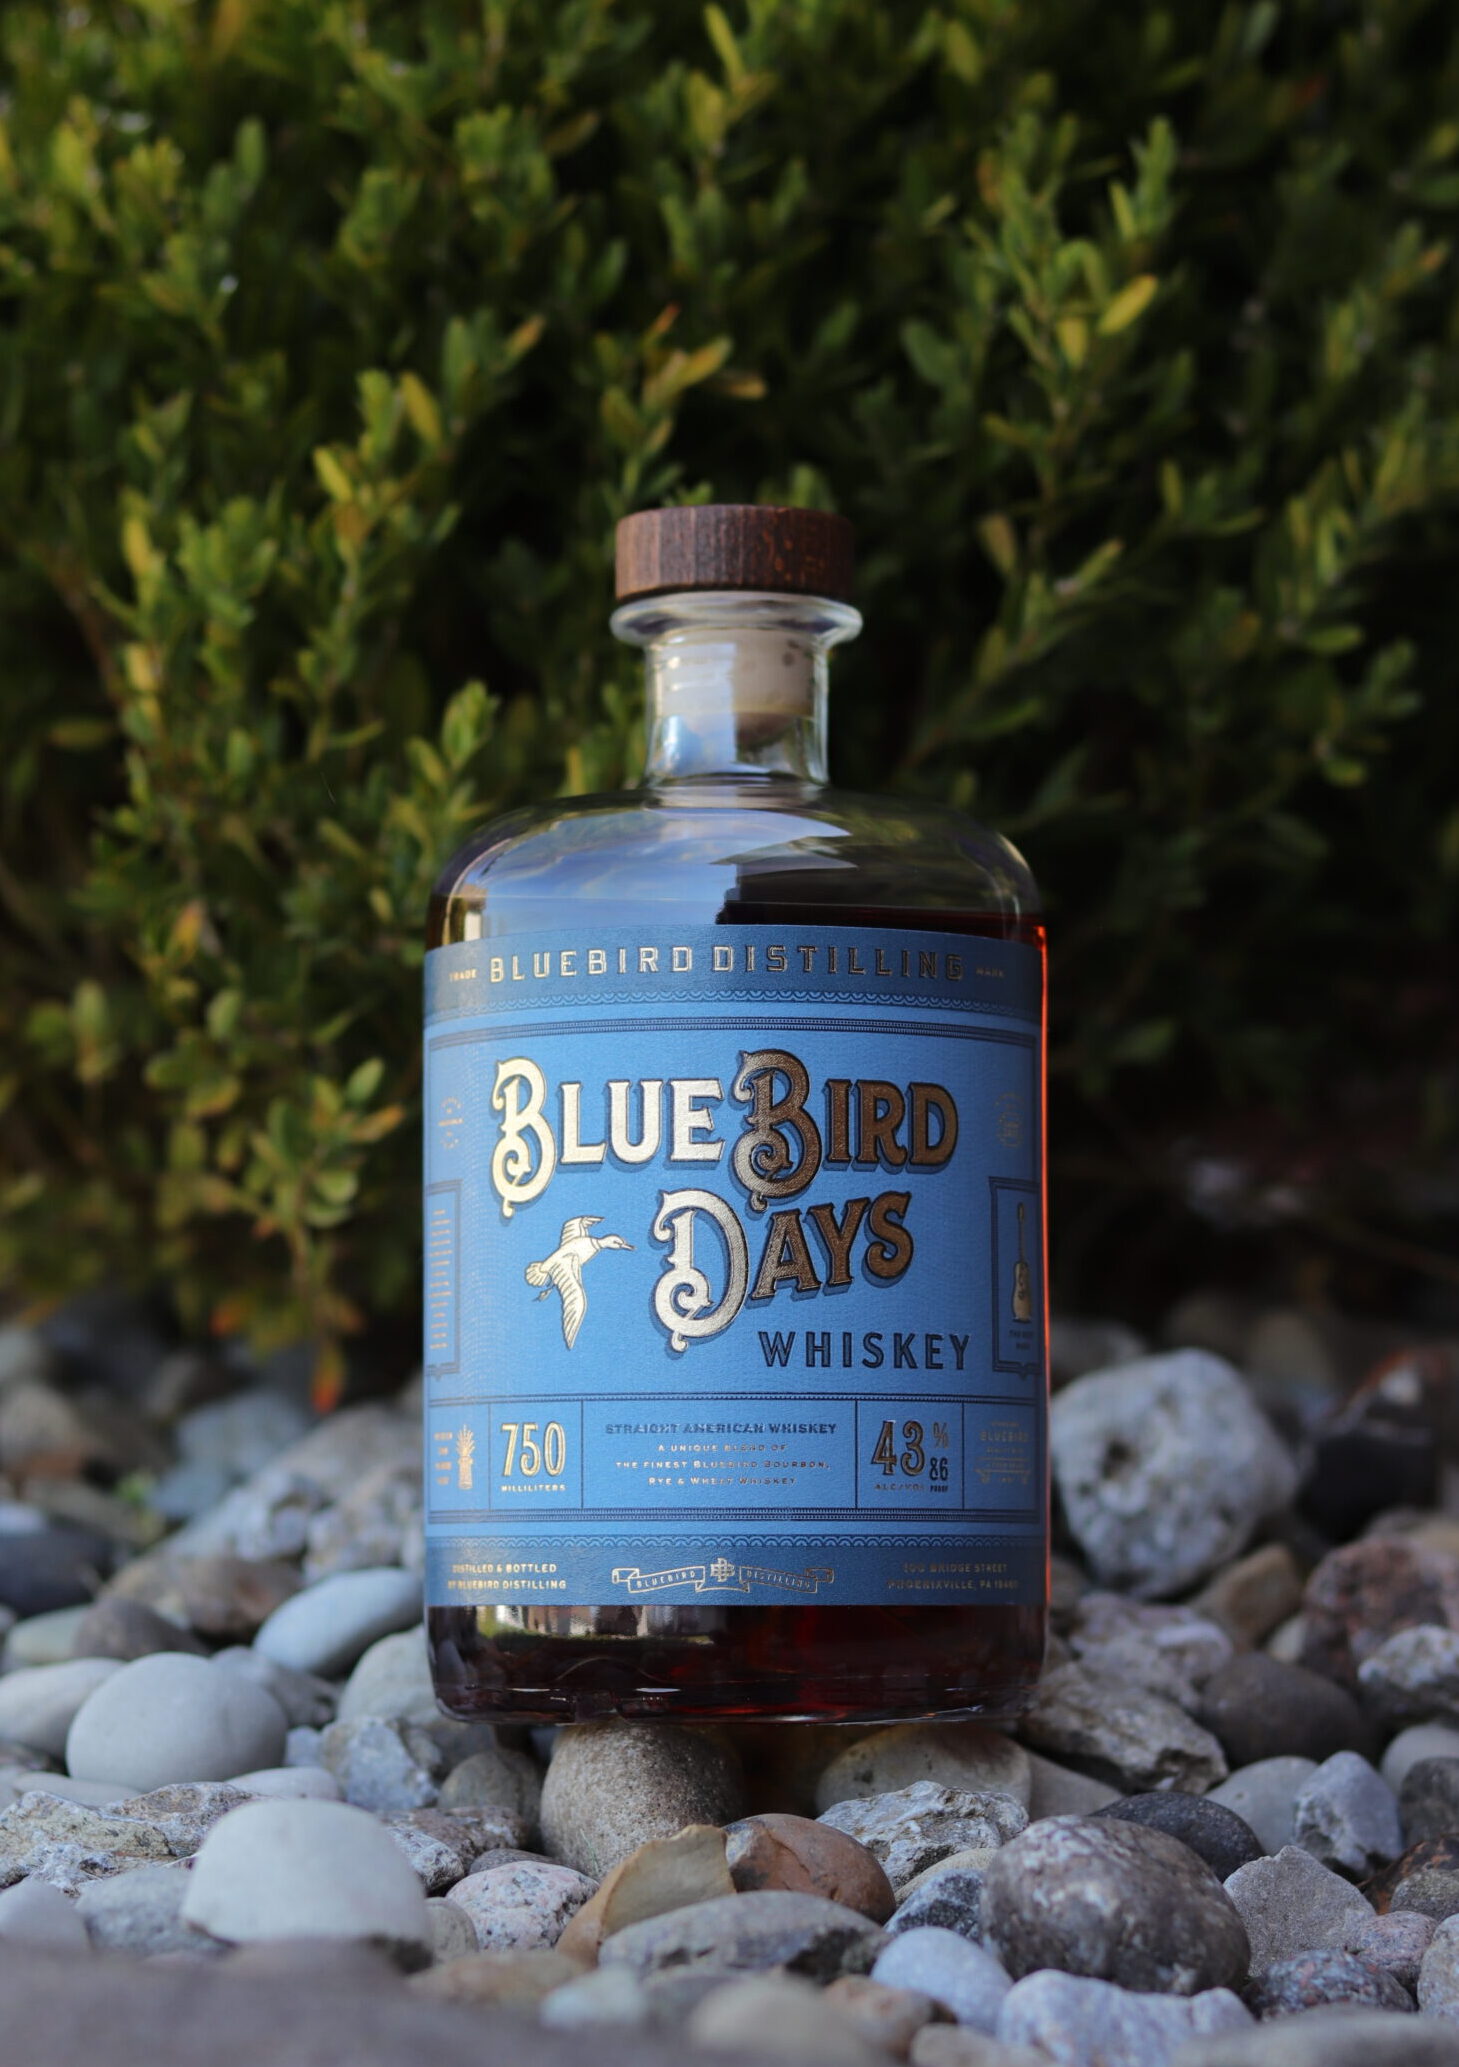 It’s a Great Day for a Bluebird Days Whiskey Review